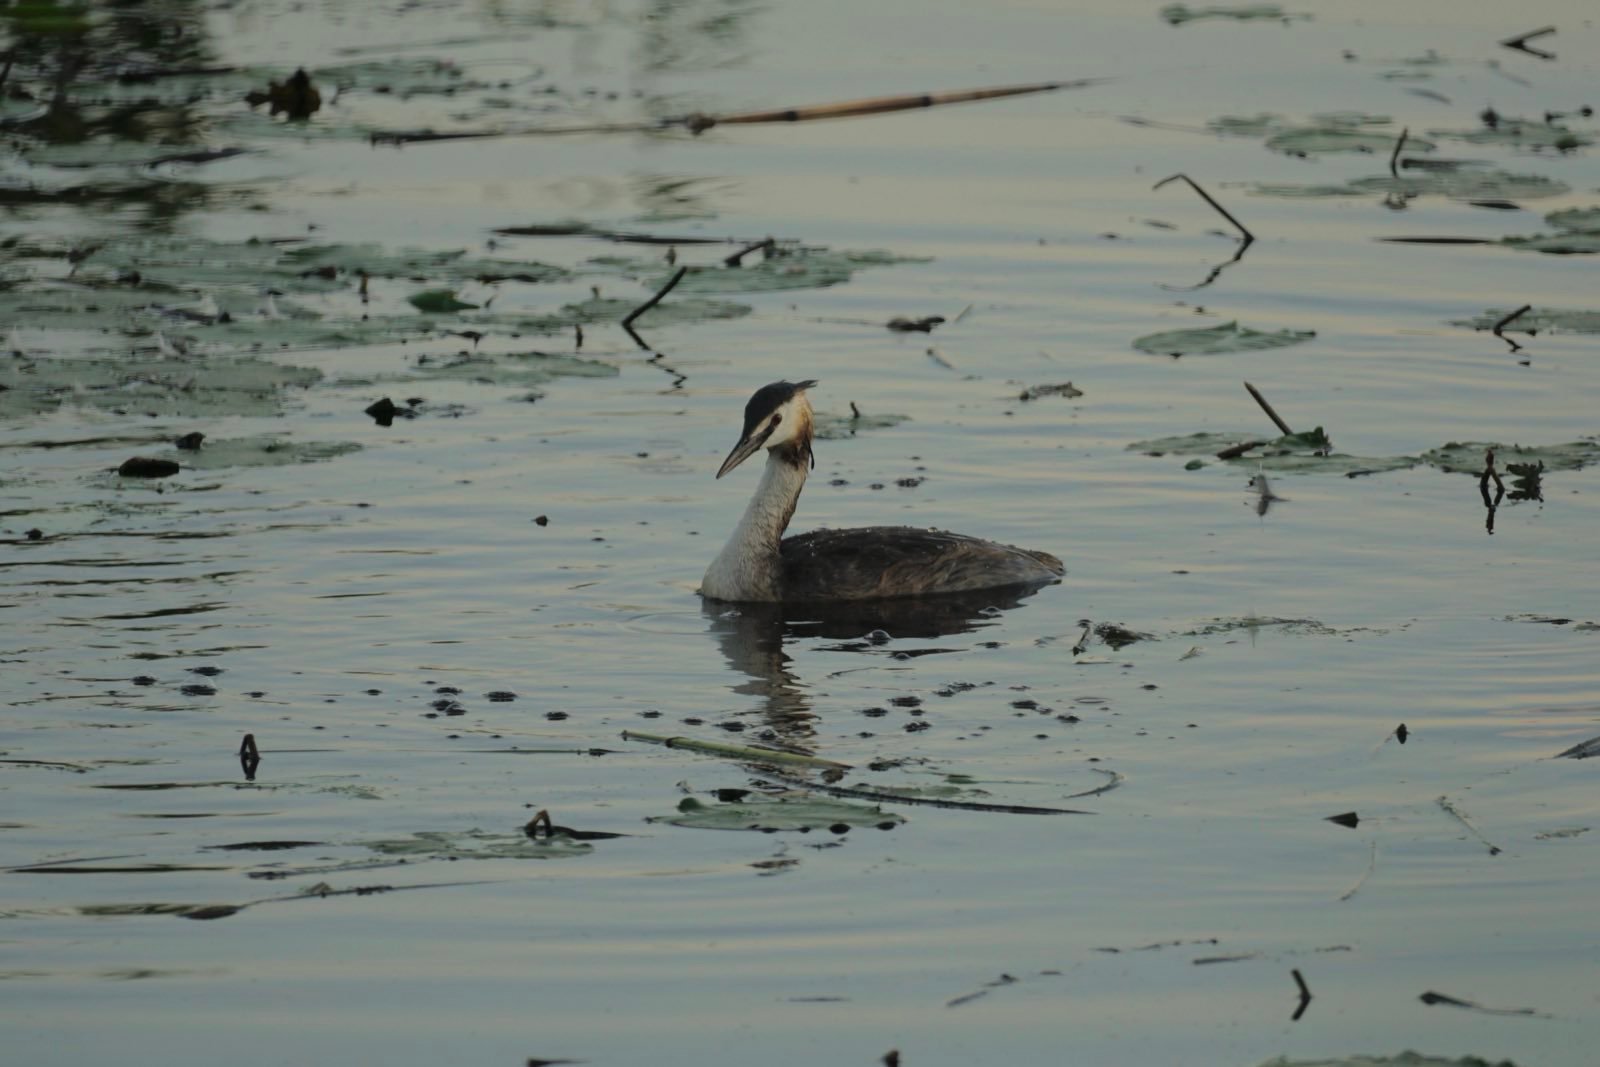 A Crested Grebe in the middle of a pond.